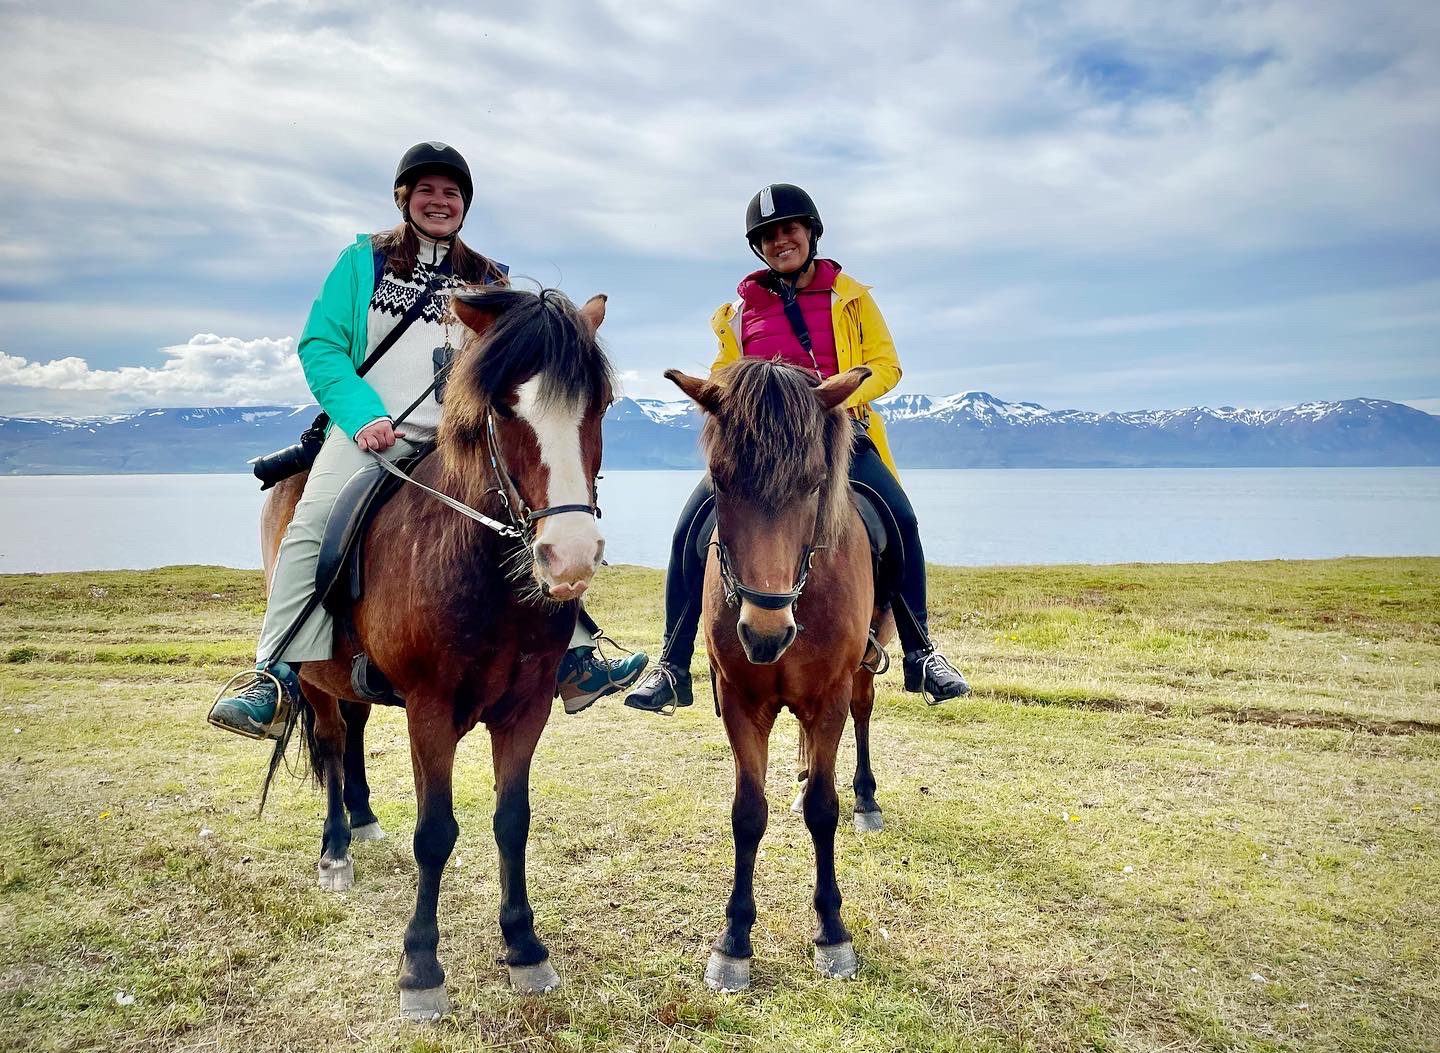 Amanda and Kate side by side on horseback in front of snow-covered mountains.